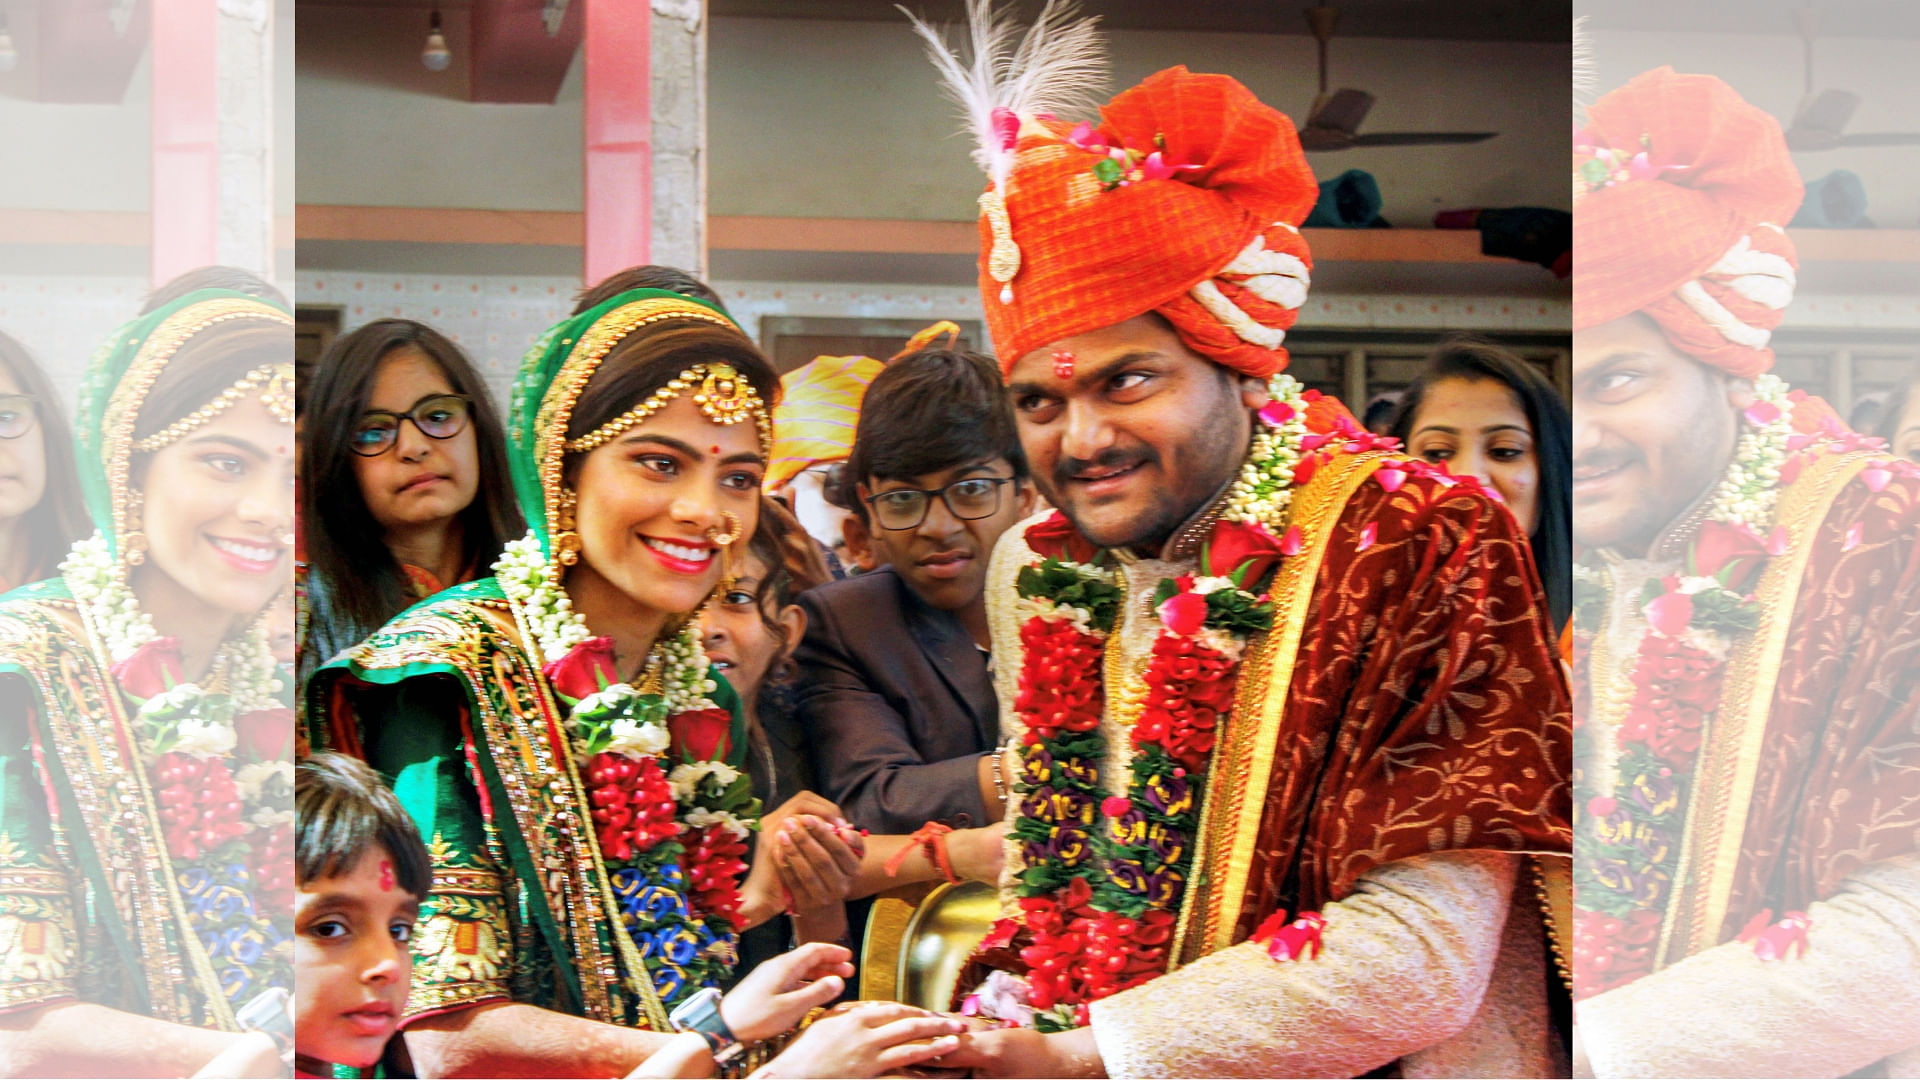 Hardik Patel got married in a close ceremony of only about 100 guests.